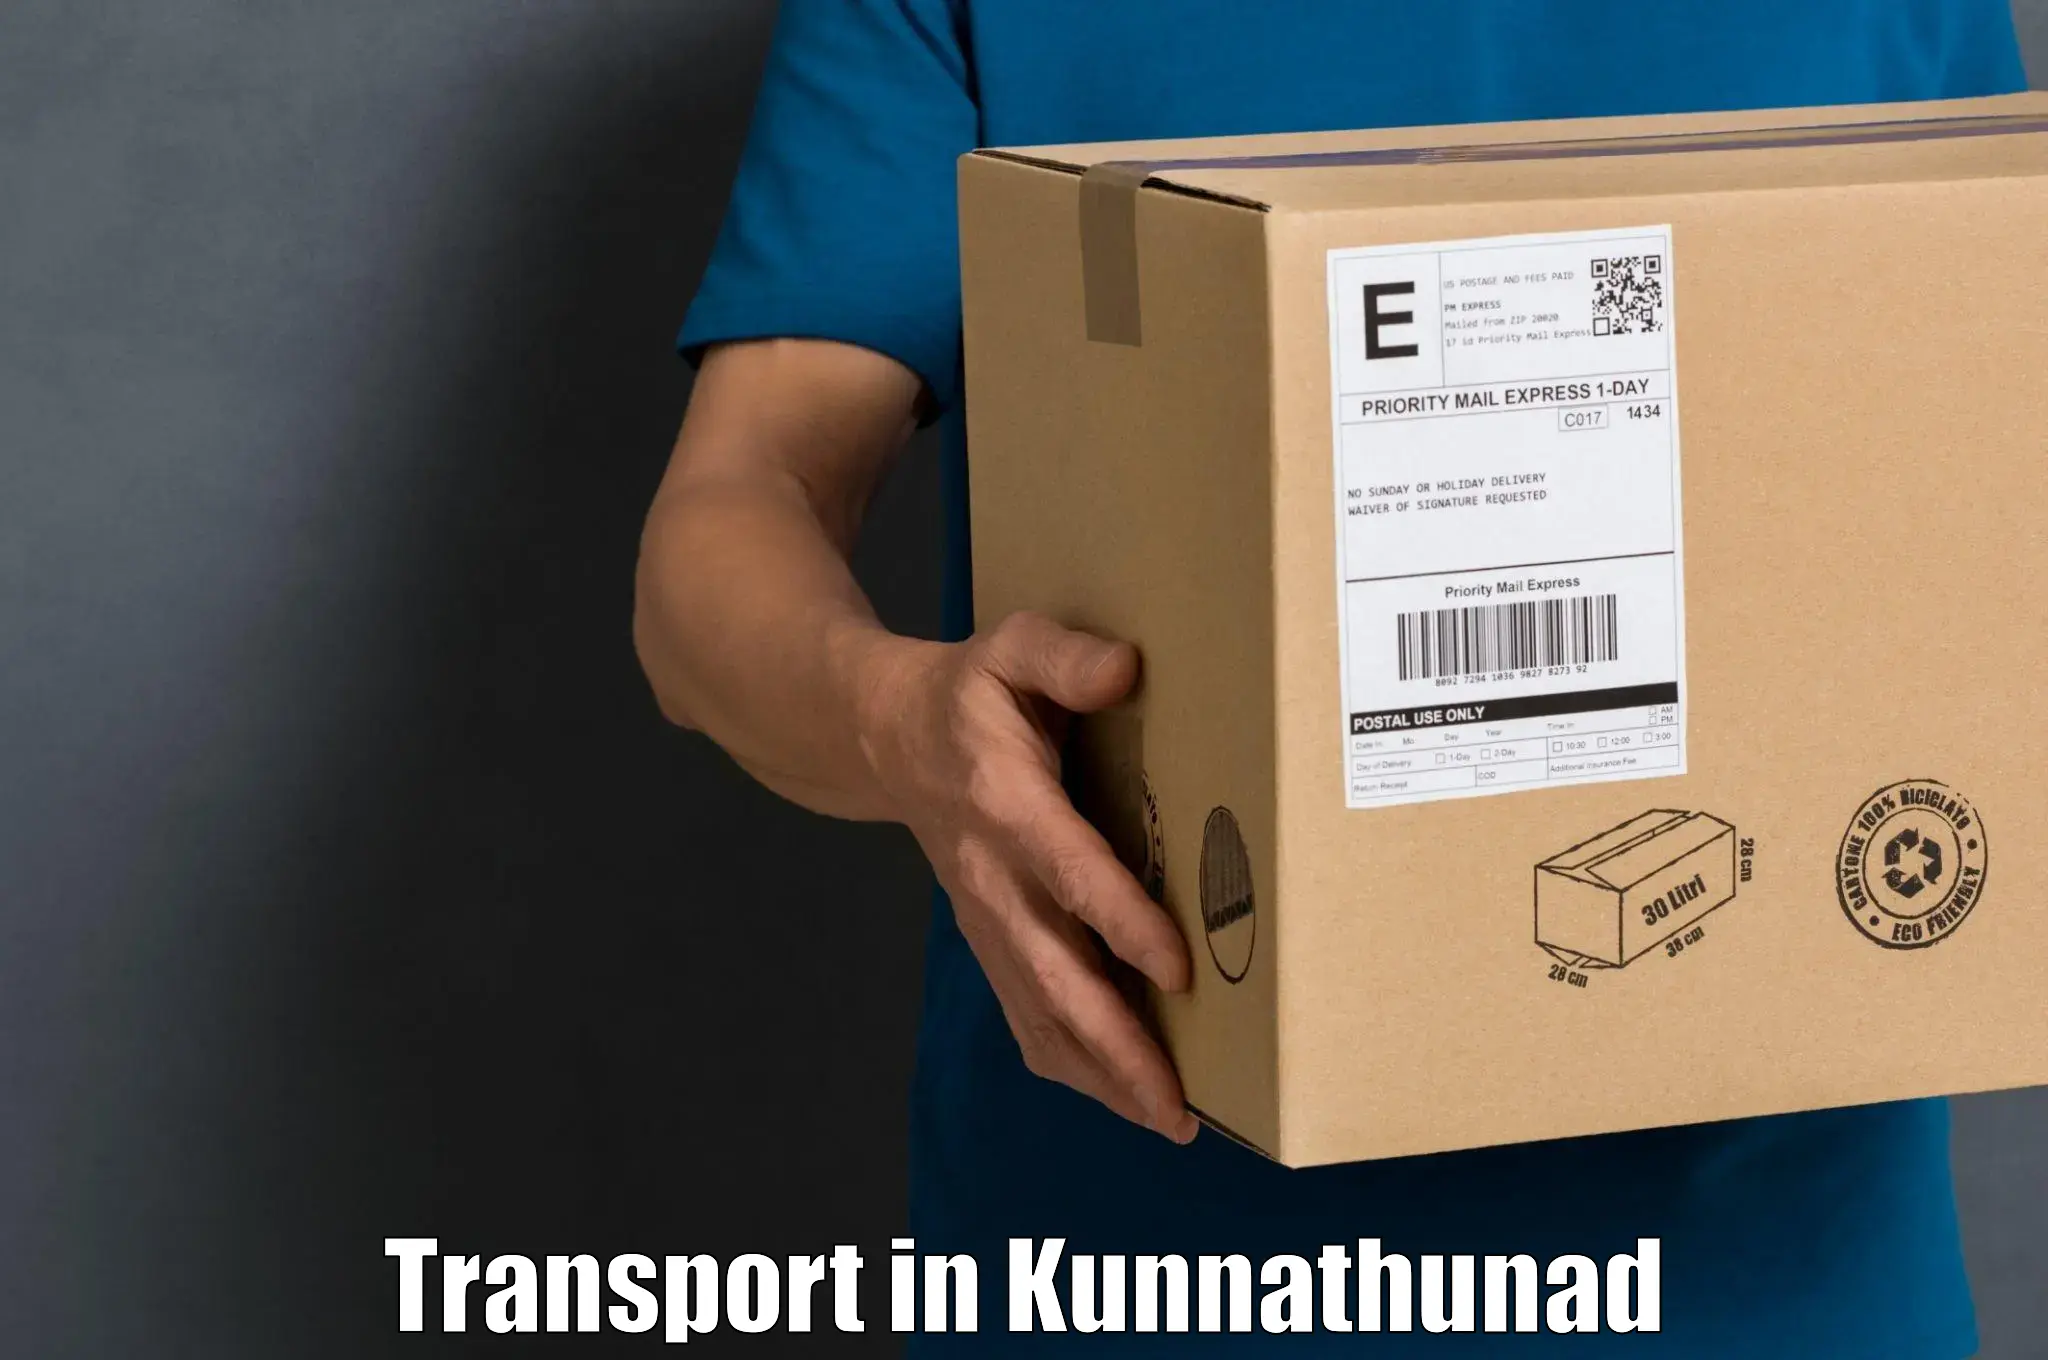 Vehicle transport services in Kunnathunad